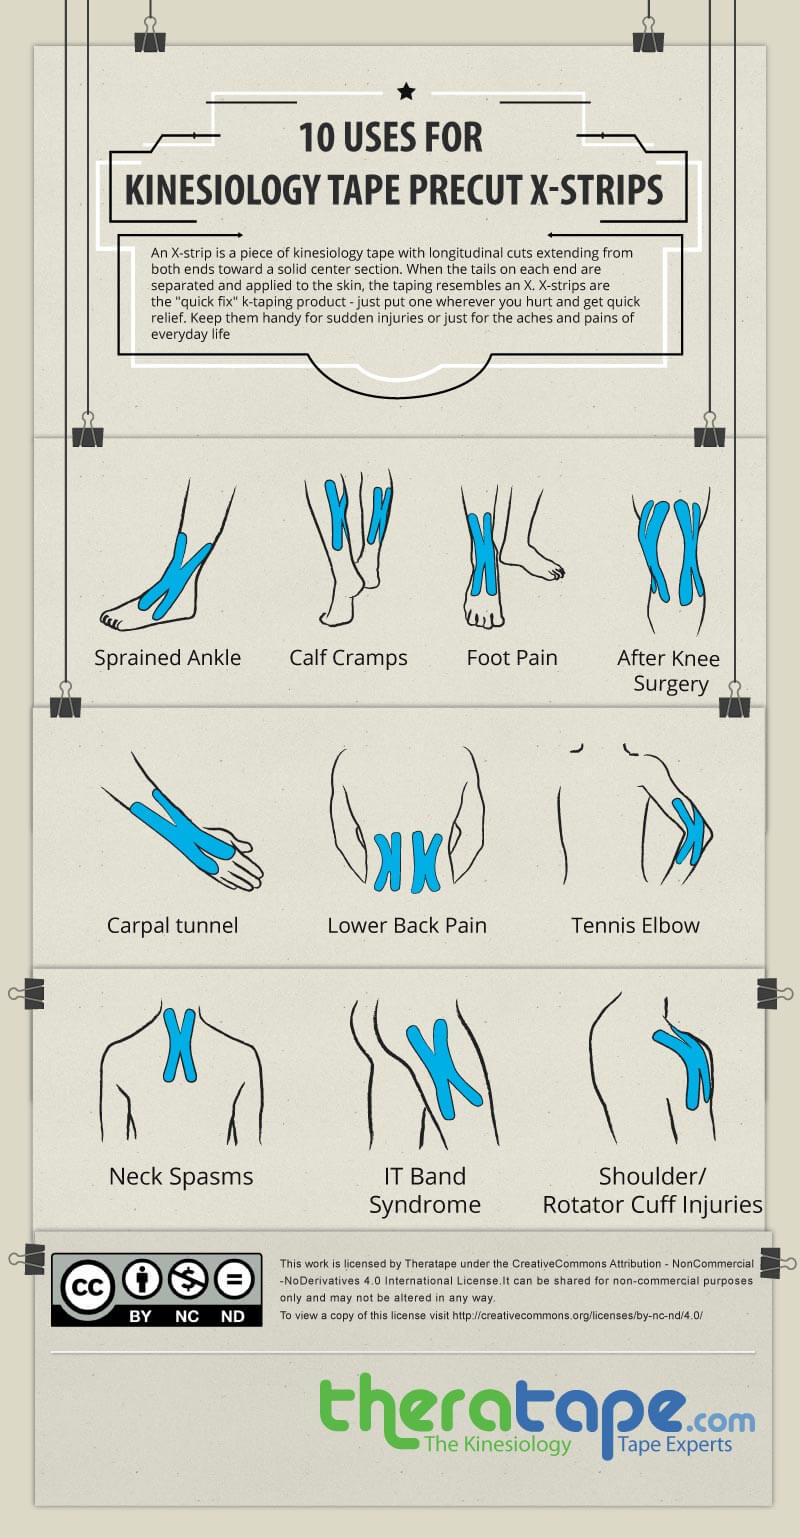 10 Uses for Kinesiology Tape X-Strips